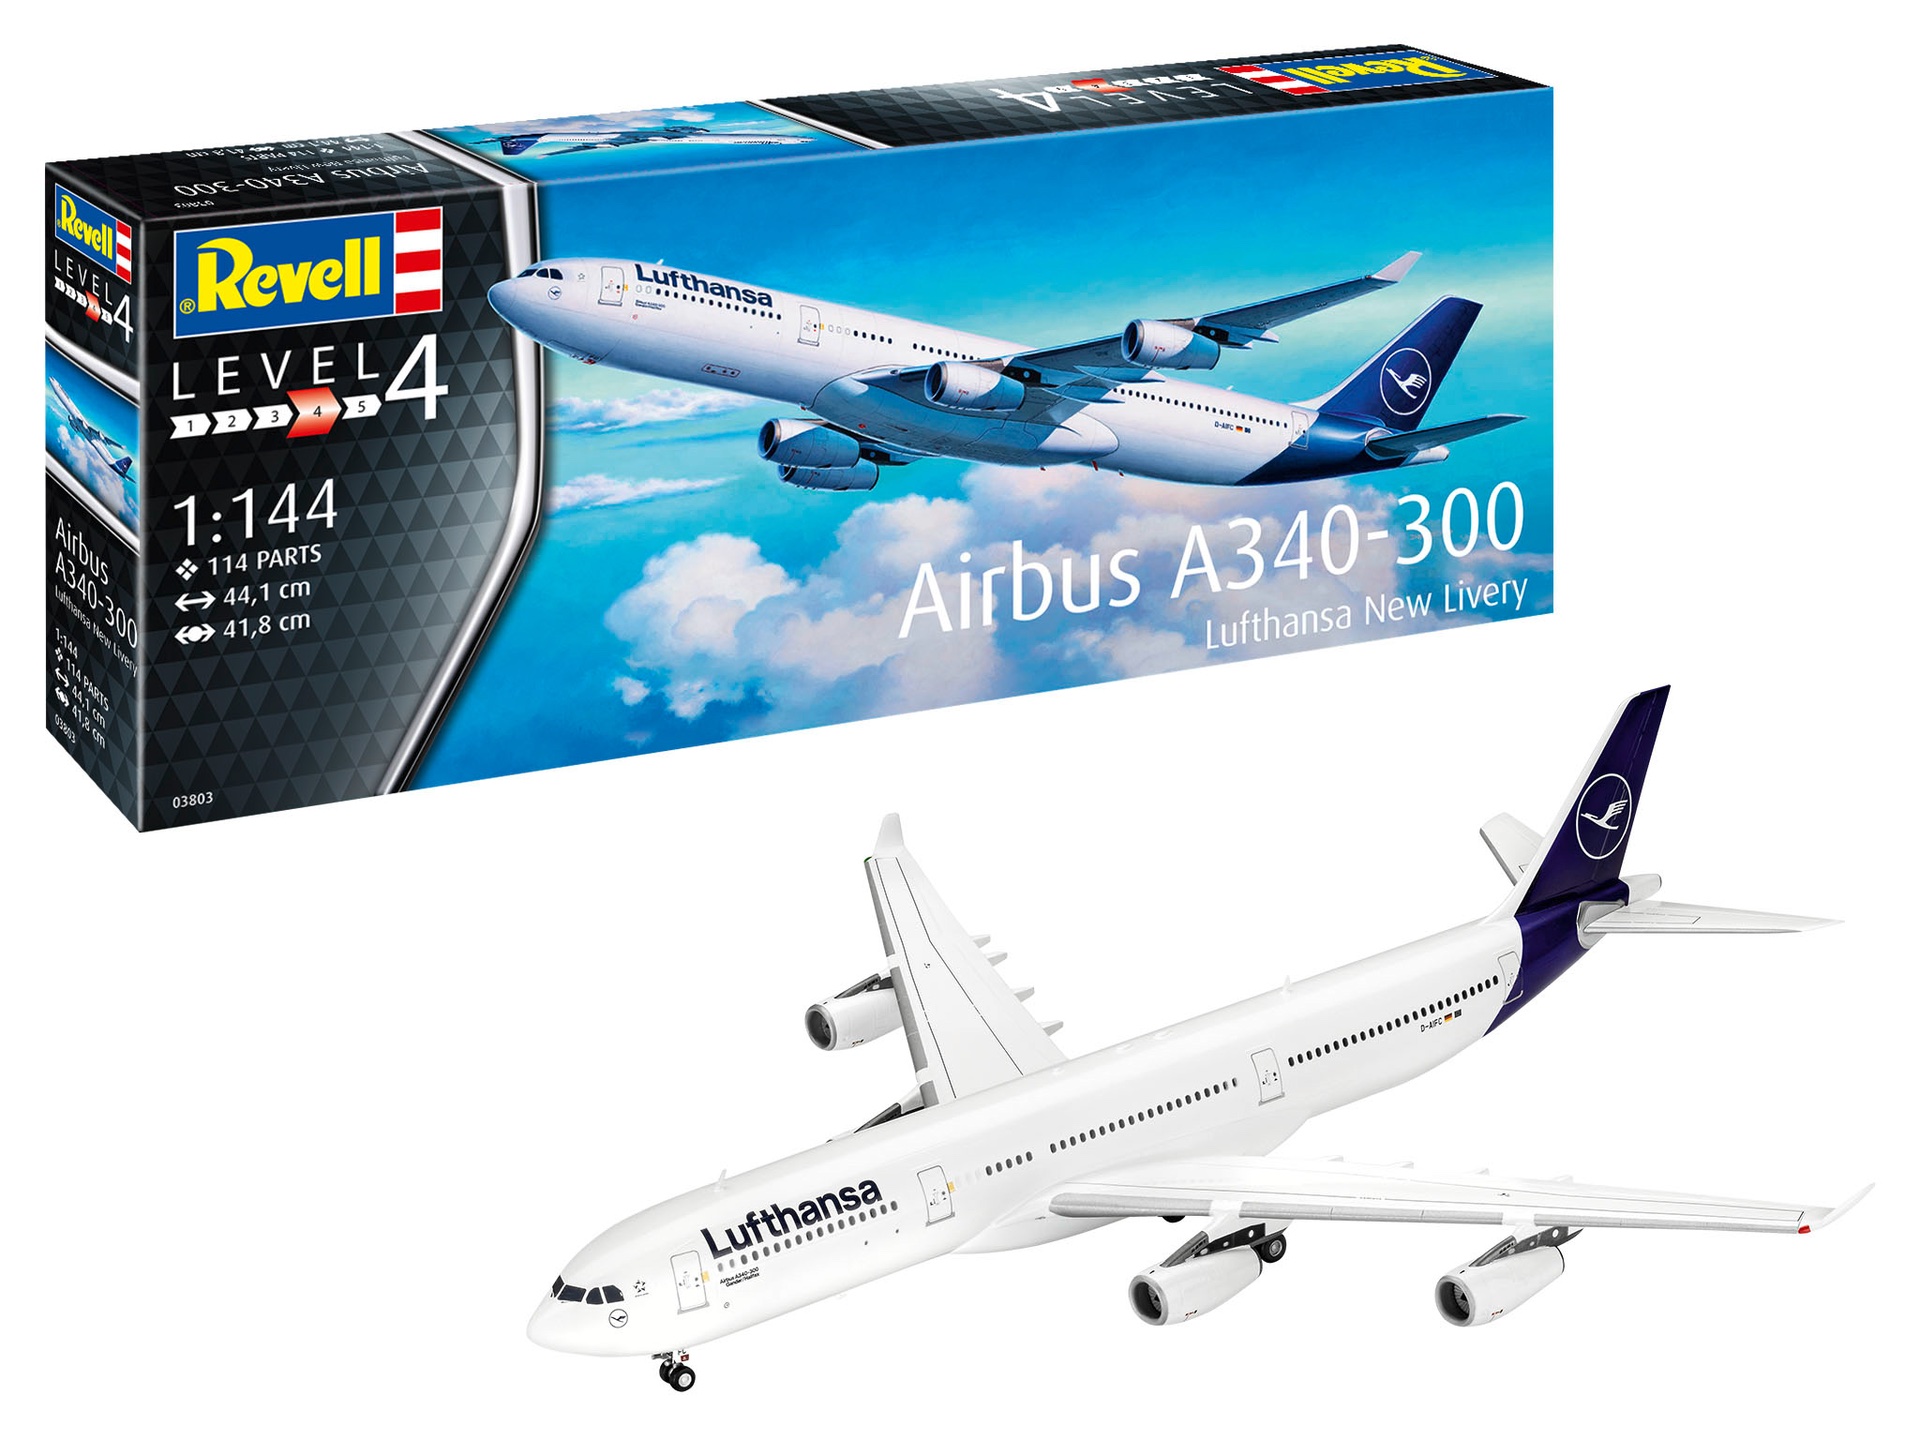 revell-03803-Airbus-A340-300-Lufthanse-New-Livery-Airliner-Urlaubsflieger